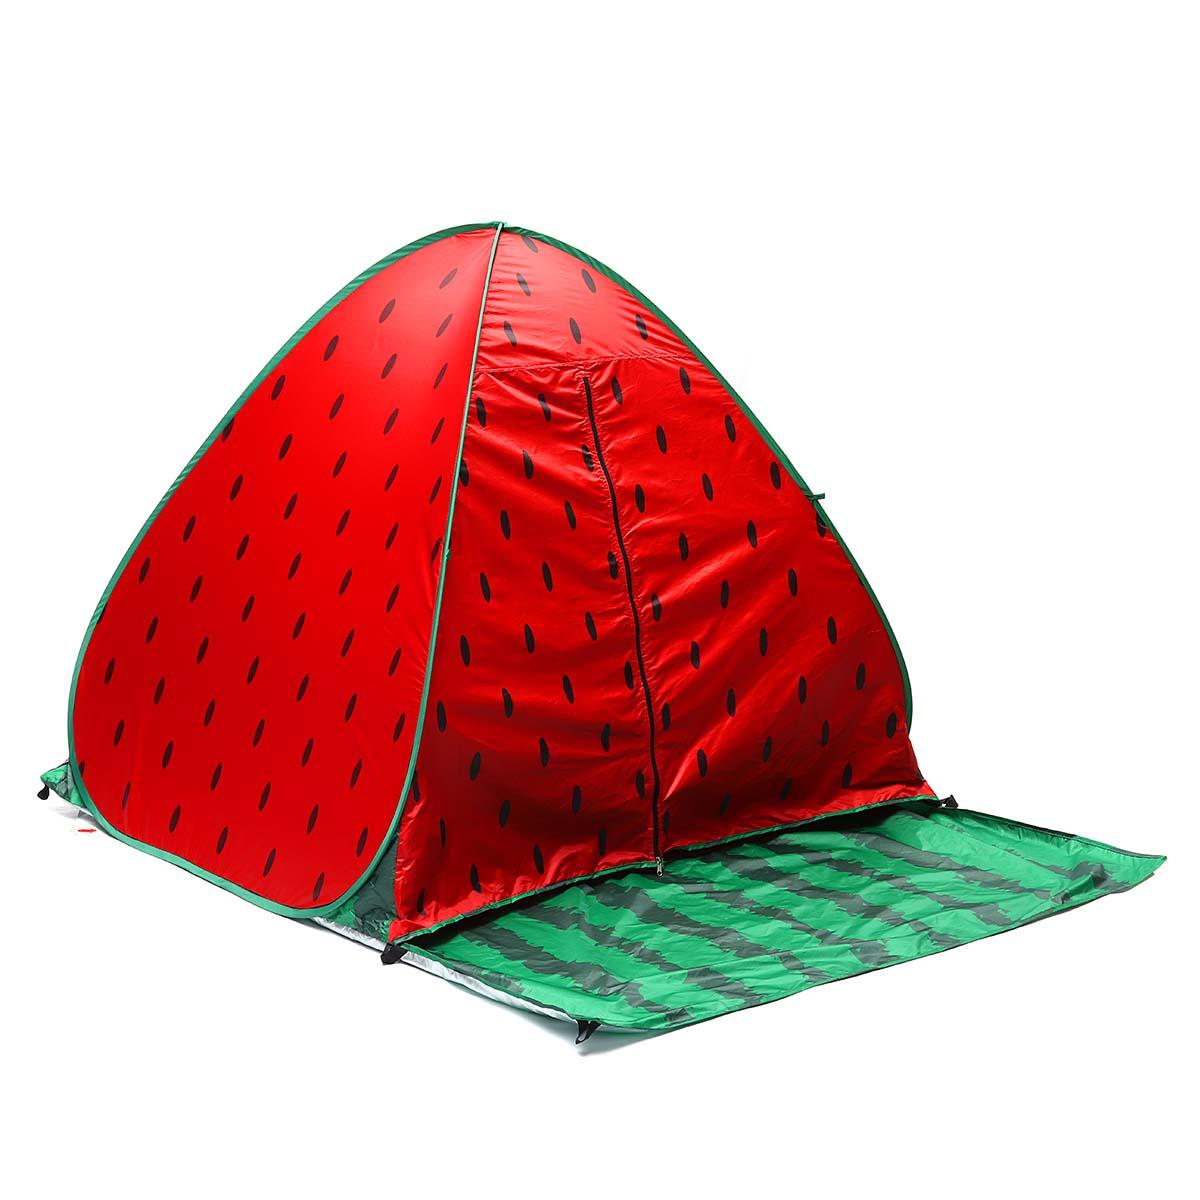 Outdoor Camping 2-3 People Automatic Tent Pop Up Waterproof UV Proof Beach Sunshade Shelter